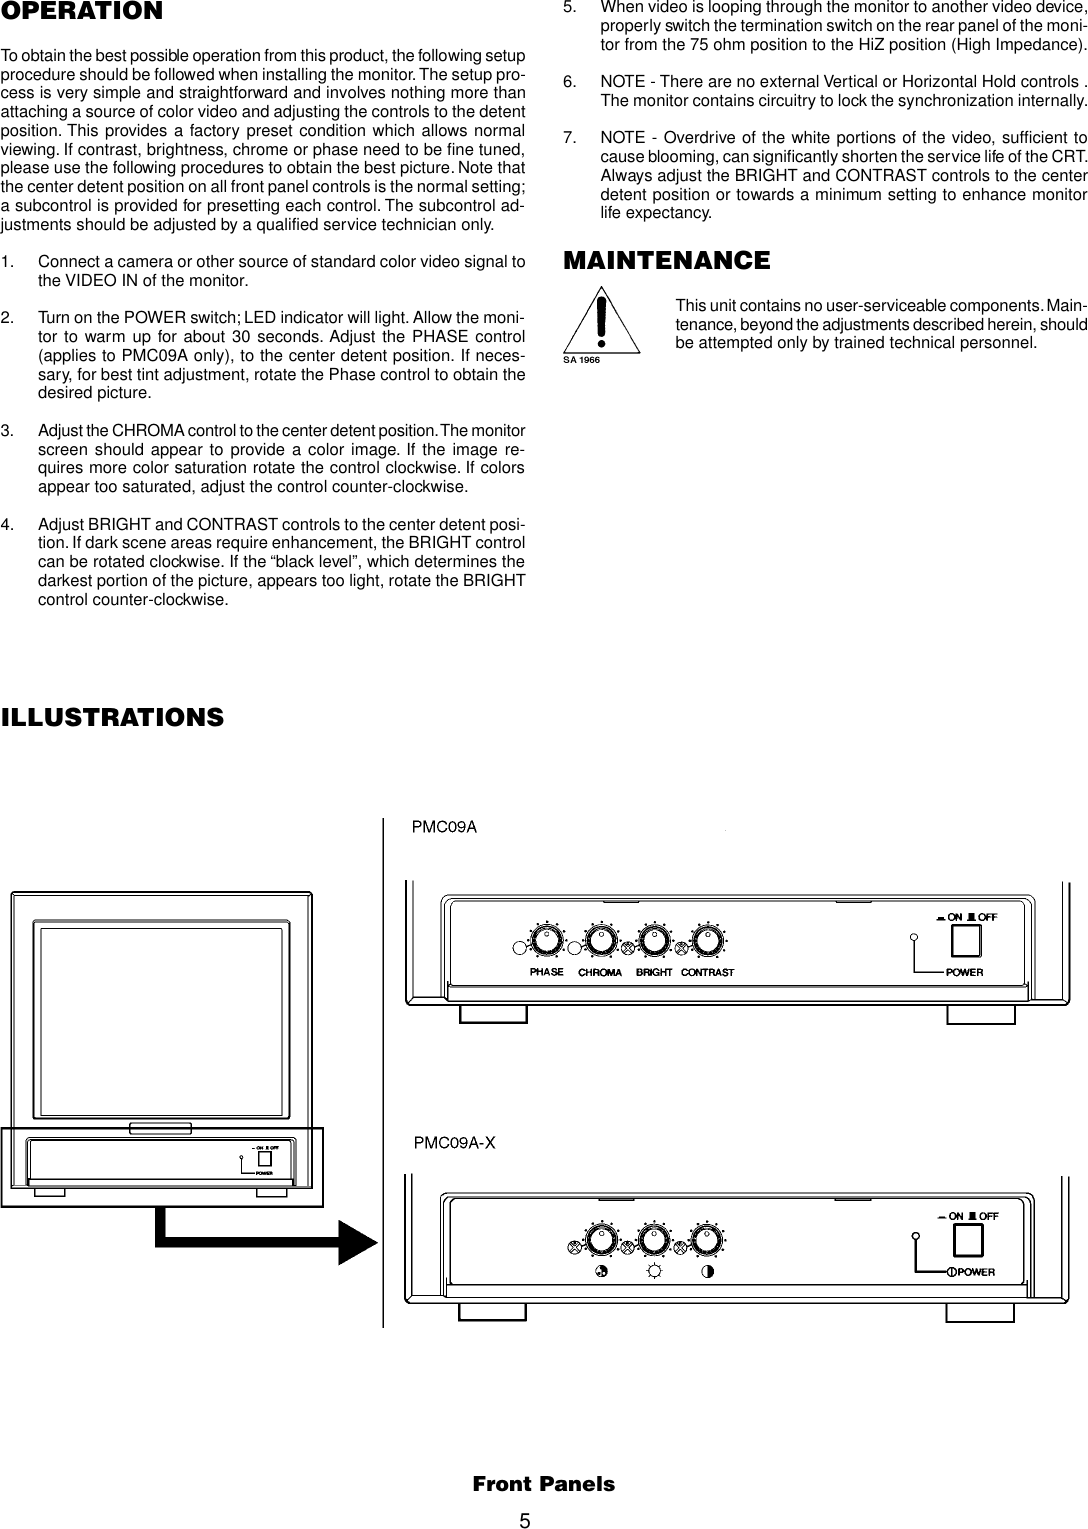 Page 5 of 8 - Pelco Pelco-9-Color-Monitor-Pmc09A-Series-Users-Manual--5  Pelco-9-color-monitor-pmc09a-series-users-manual